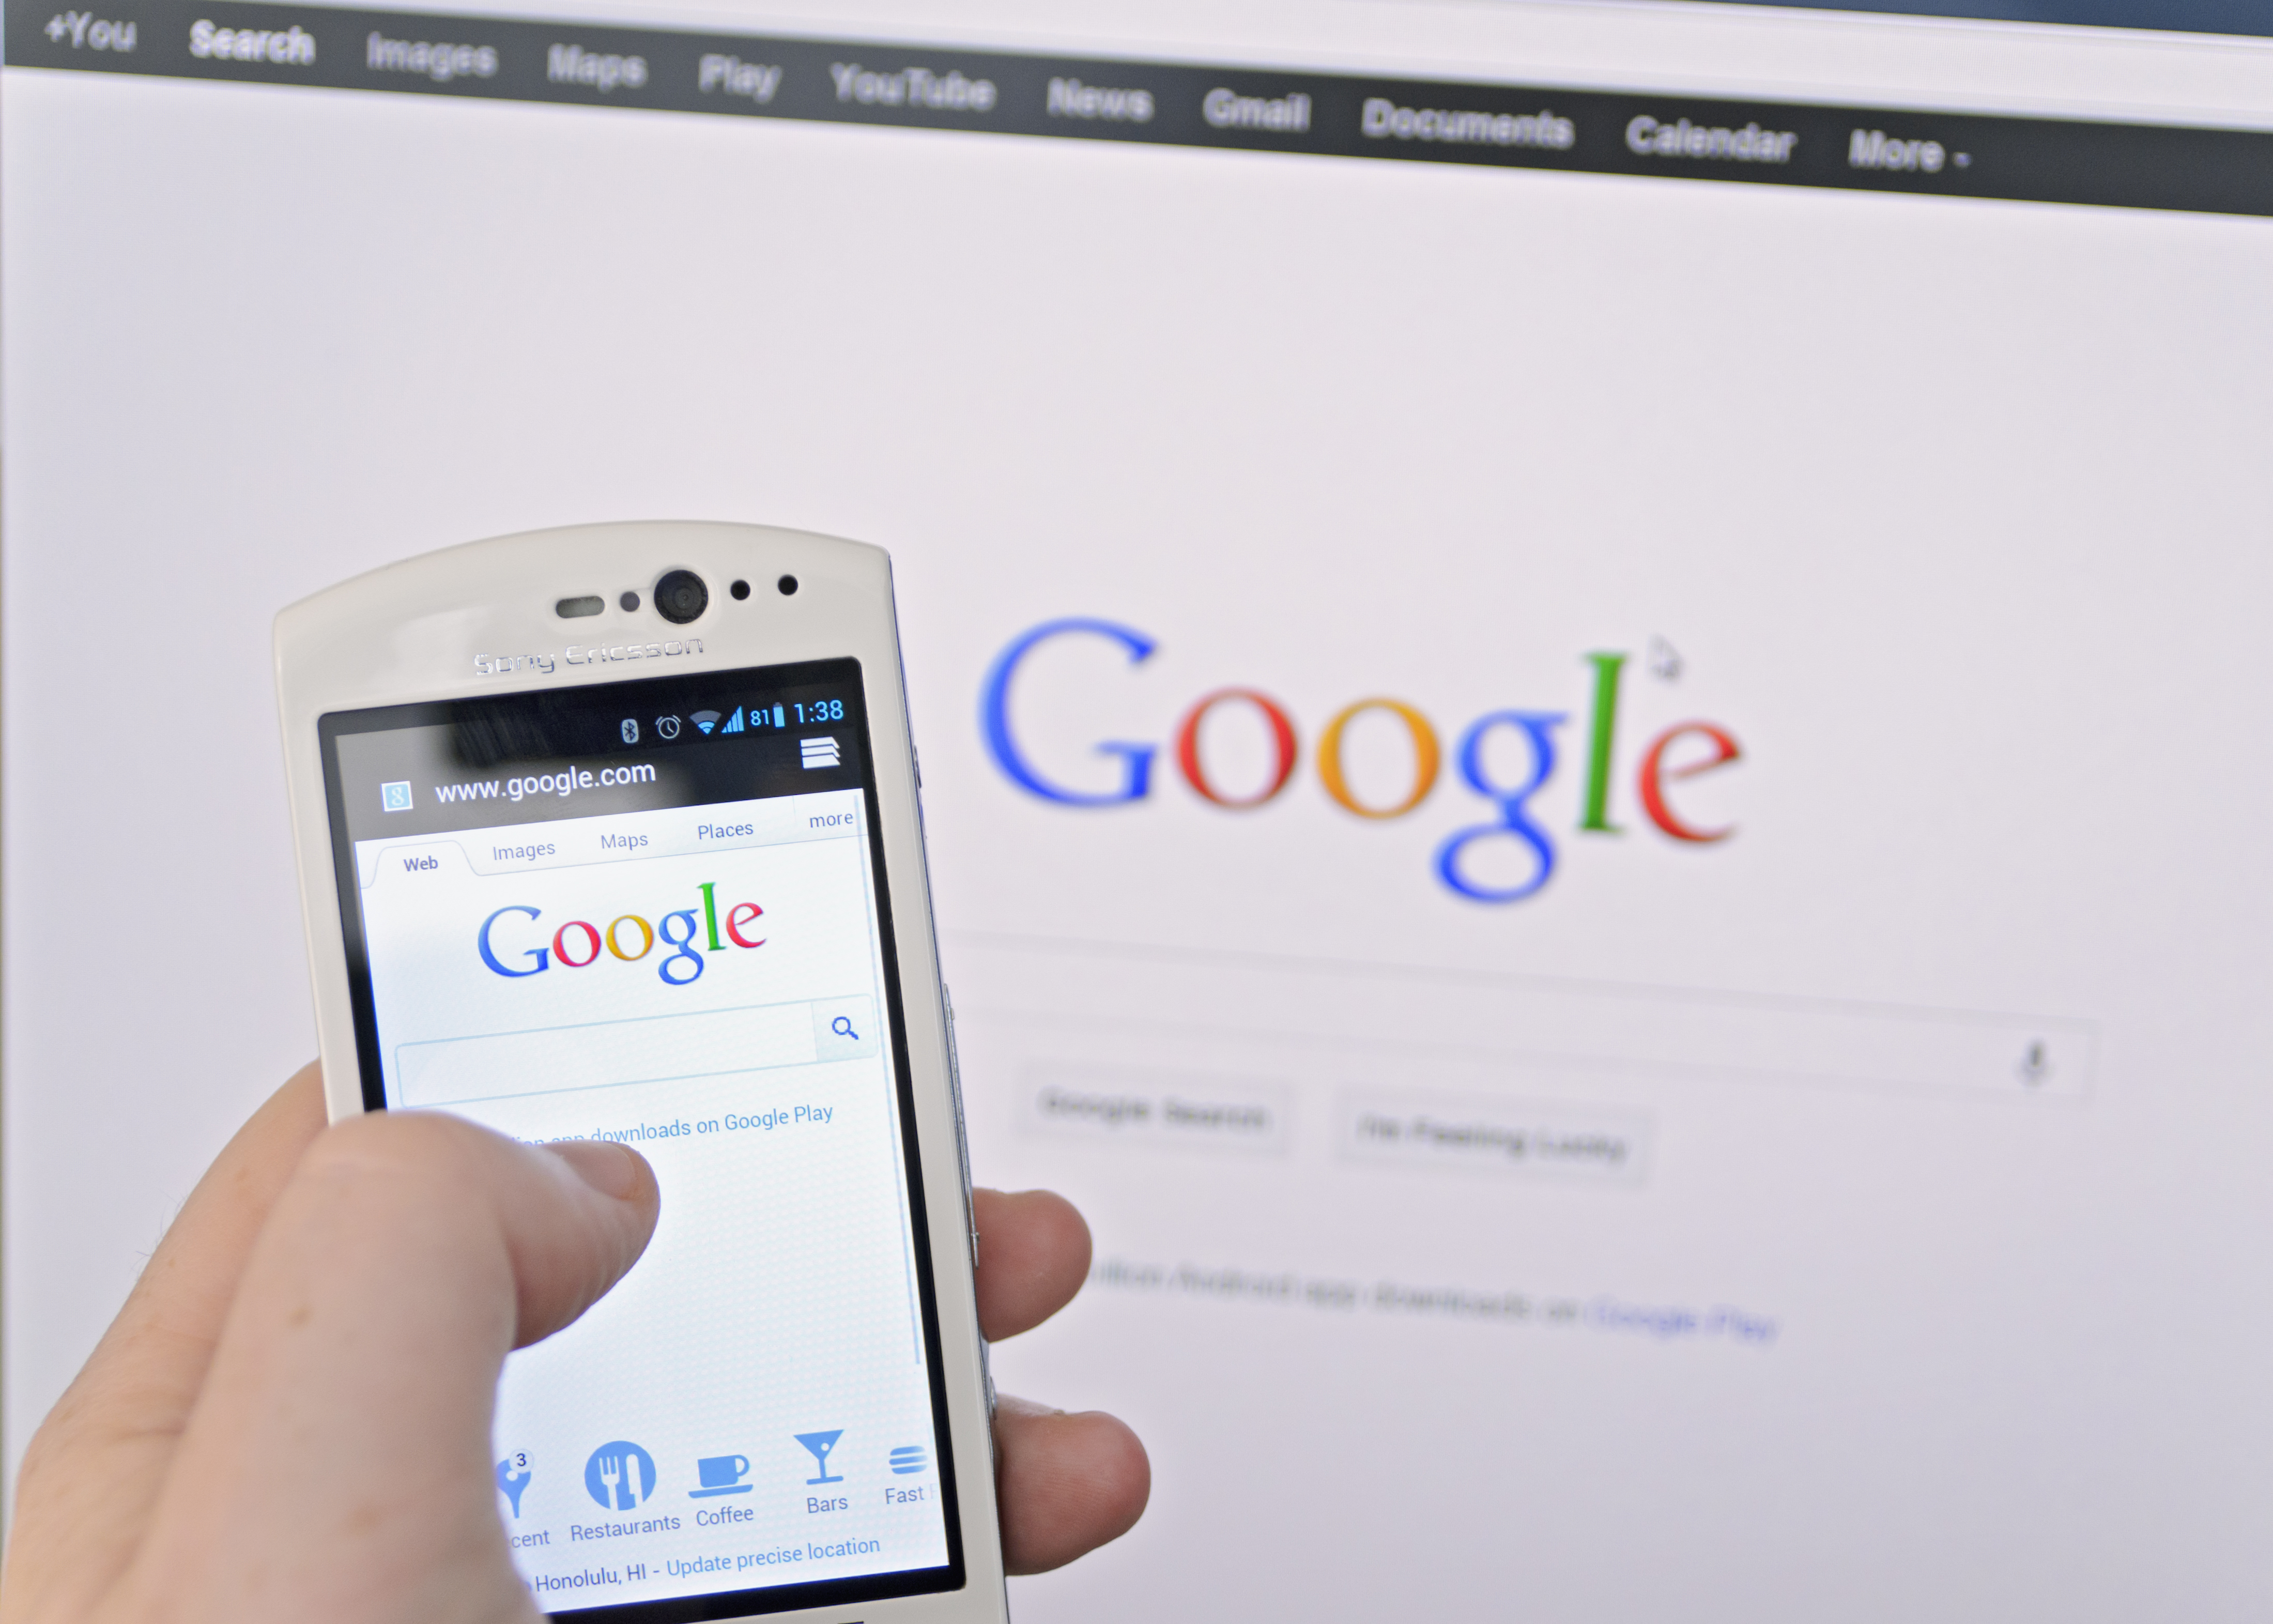 In the foreground of this picture, a hand holds a mobile phone with Google search on the screen. In the background a Google search window is open on a larger screen.